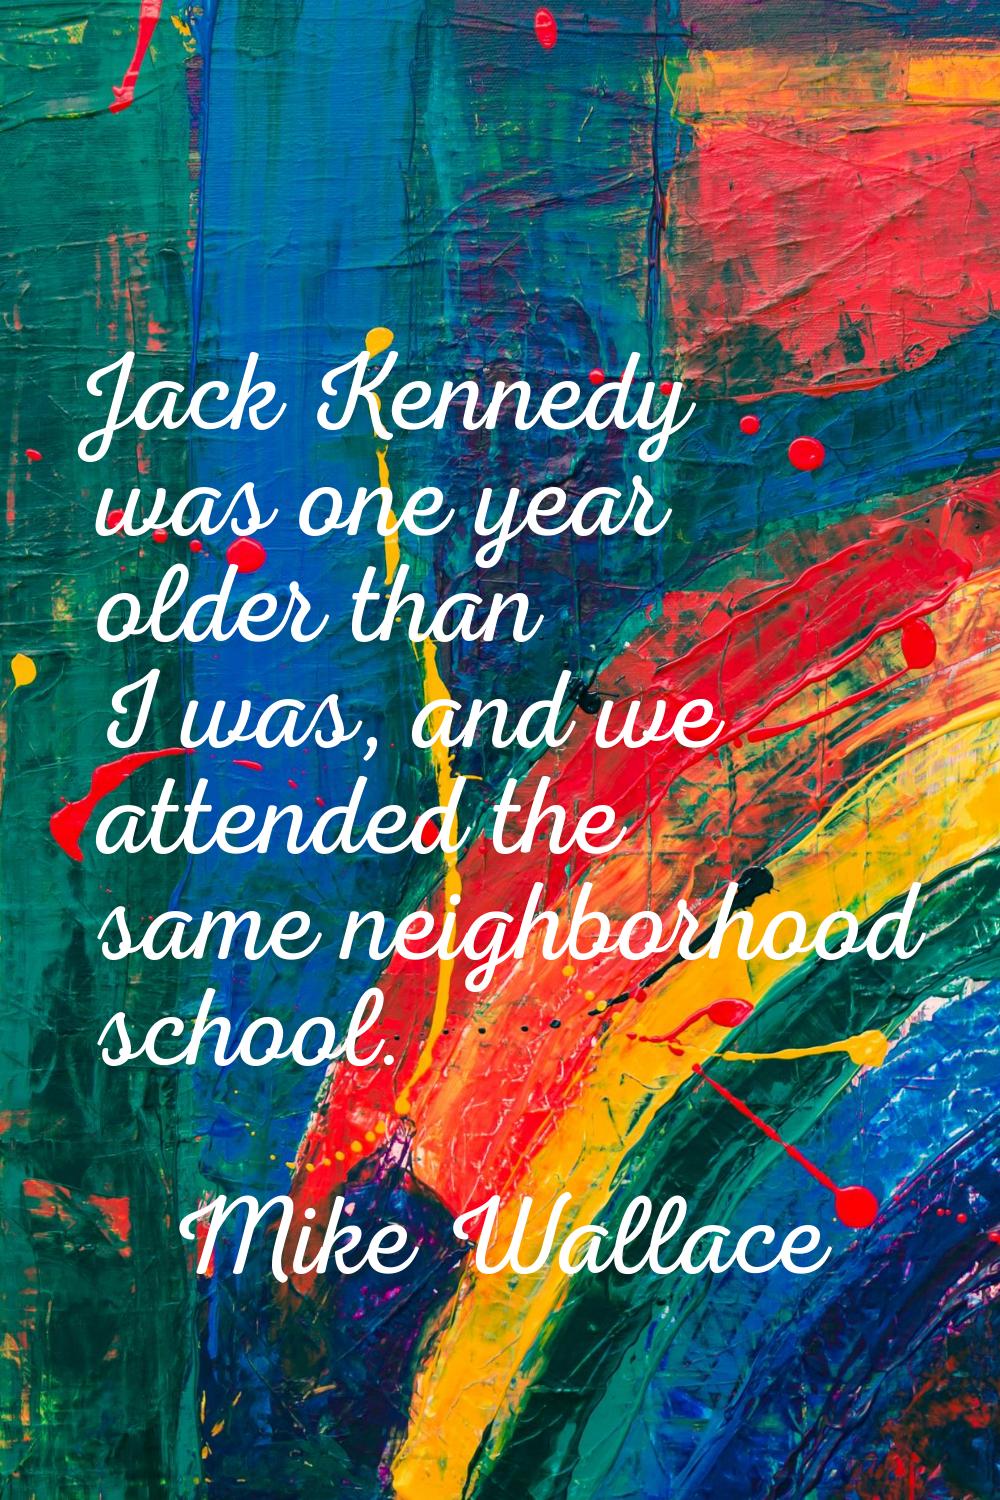 Jack Kennedy was one year older than I was, and we attended the same neighborhood school.